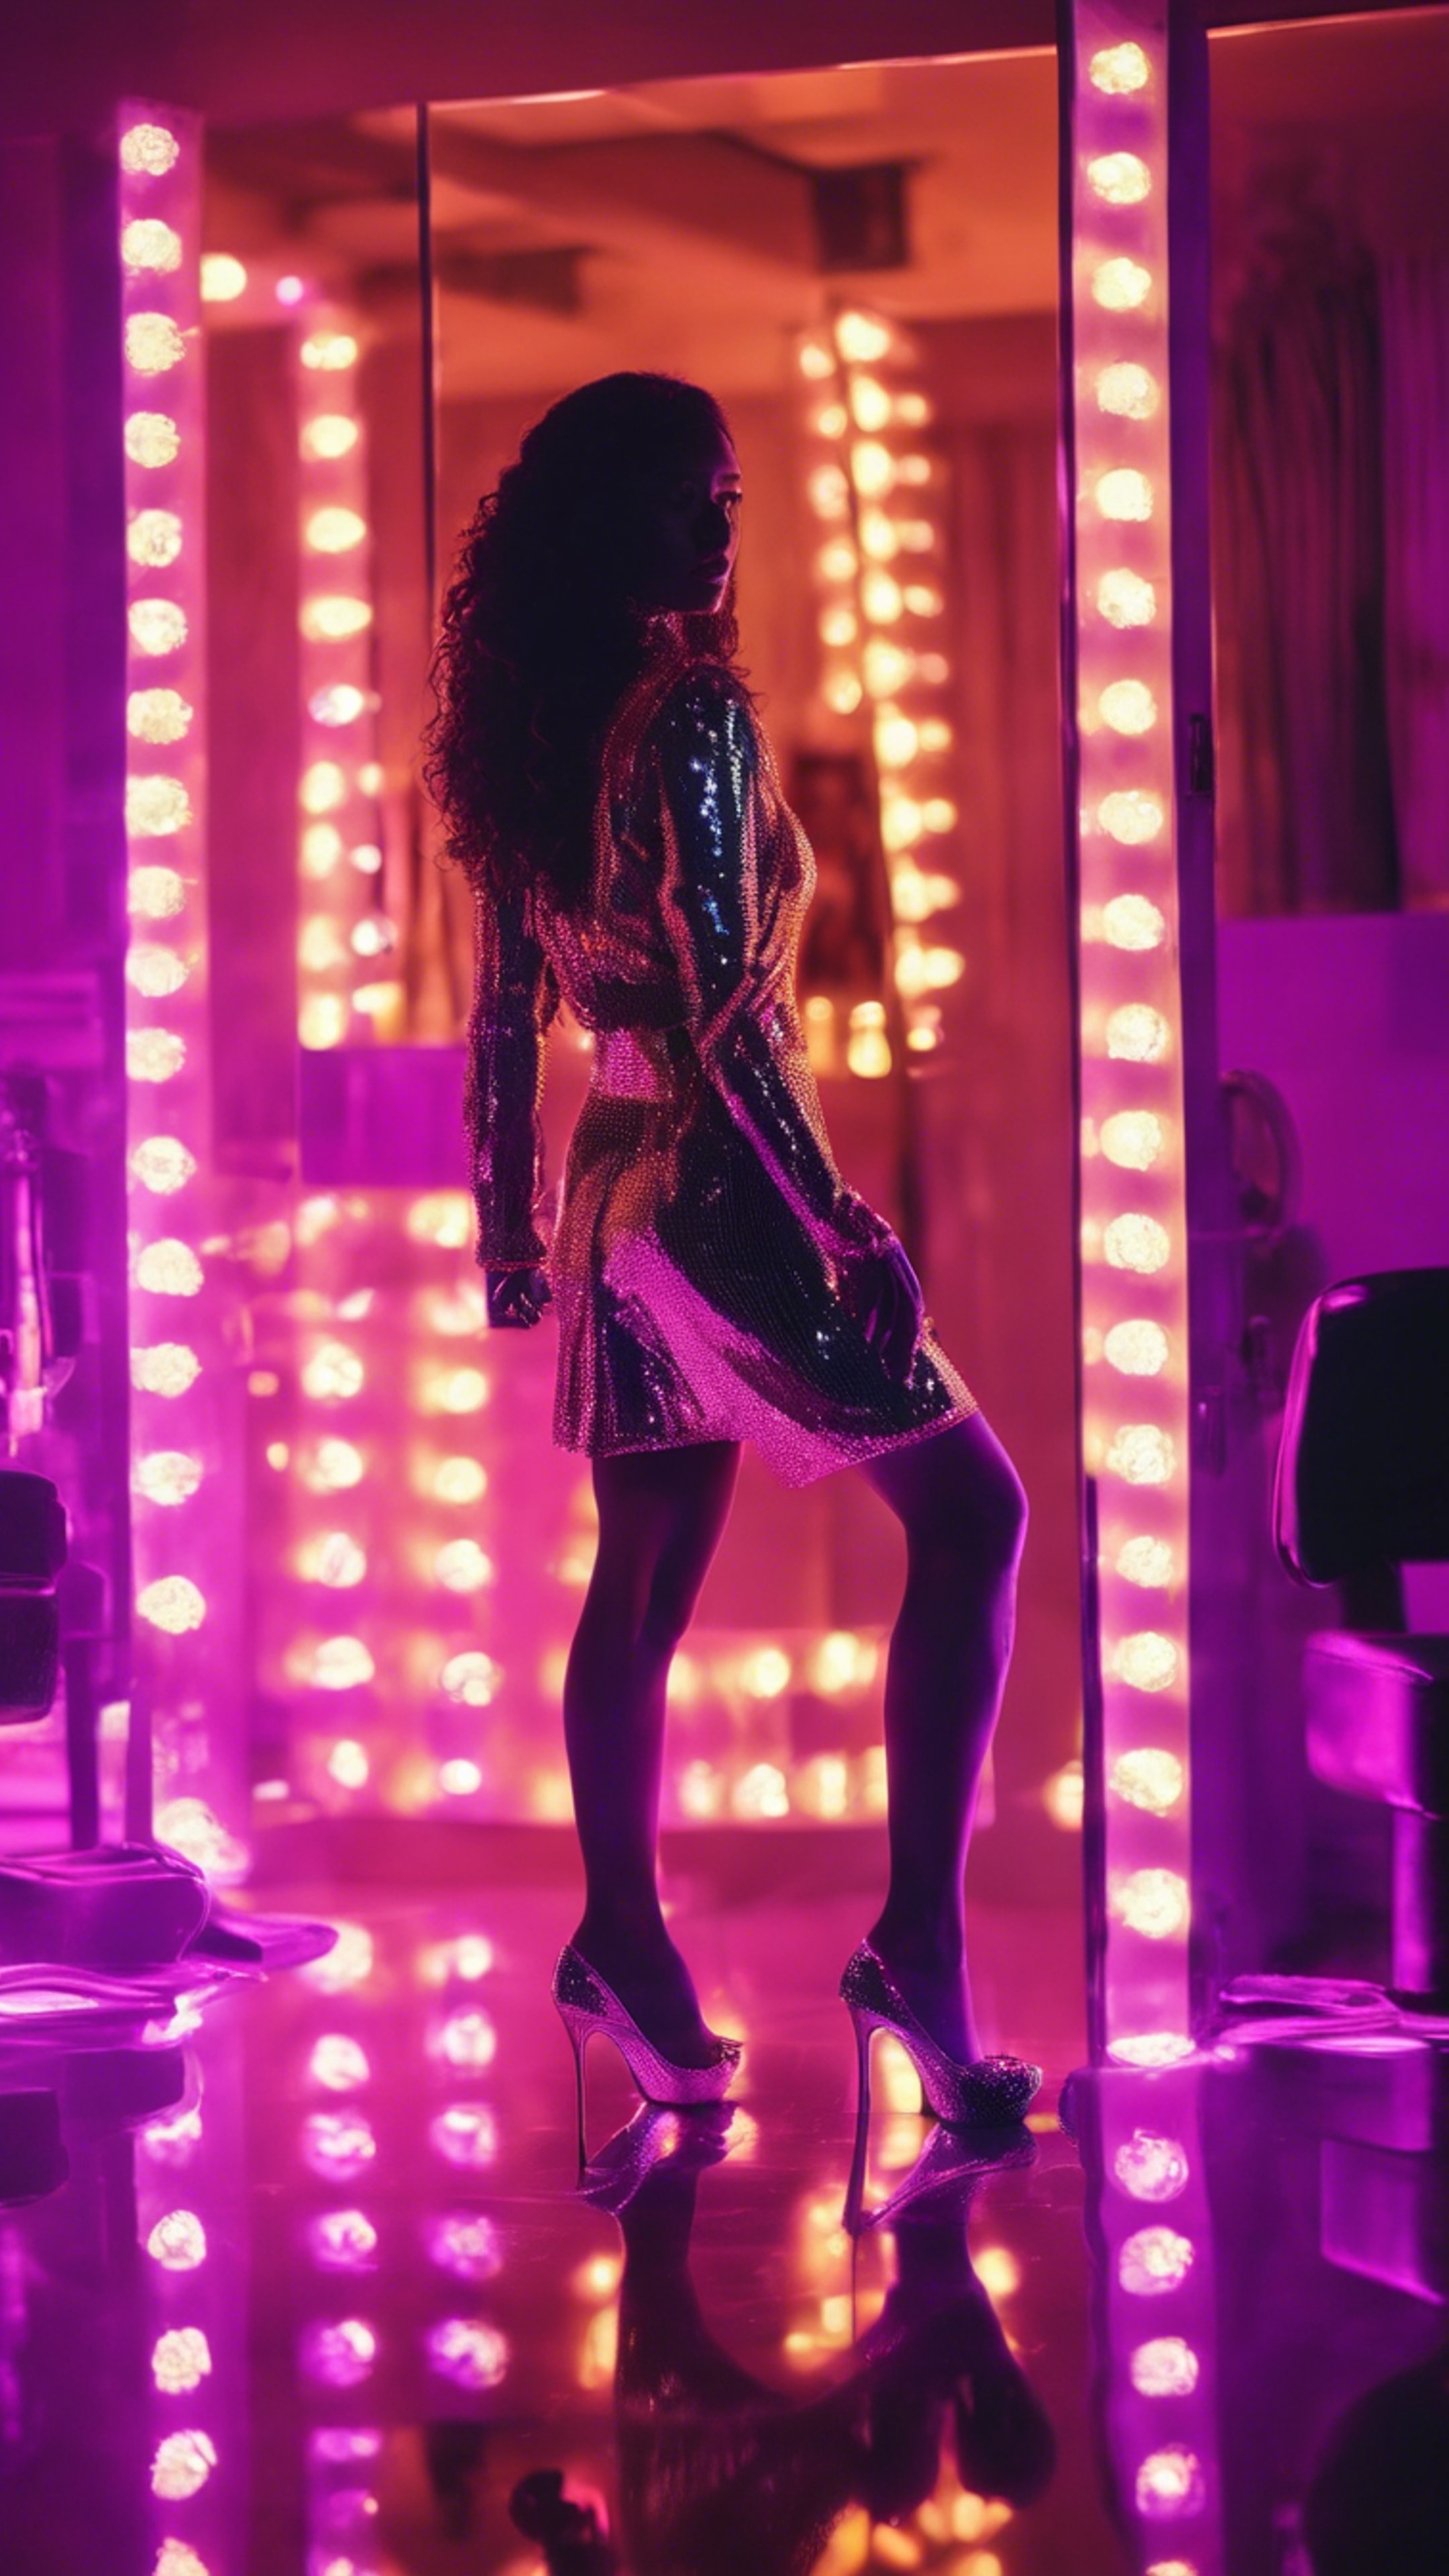 A confident baddie in a neon-lit room, dressed in sequins and high heels, her silhouette reflecting in the mirror. Шпалери[dd190a8a8fd944b882f7]